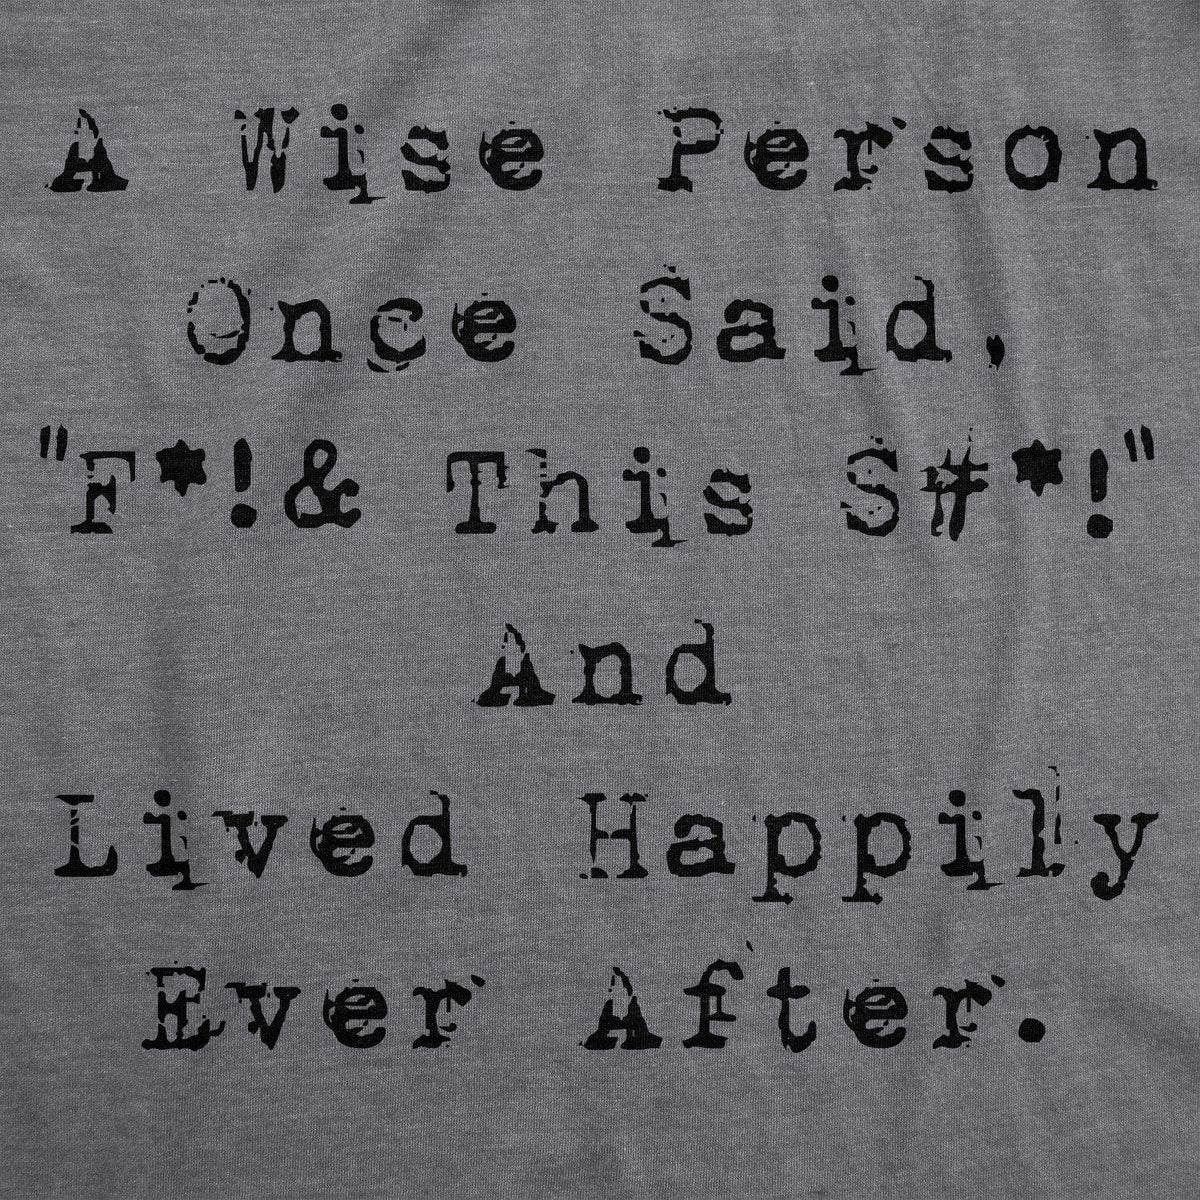 Wise Person Lived Happily Ever After Men&#39;s Tshirt  -  Crazy Dog T-Shirts